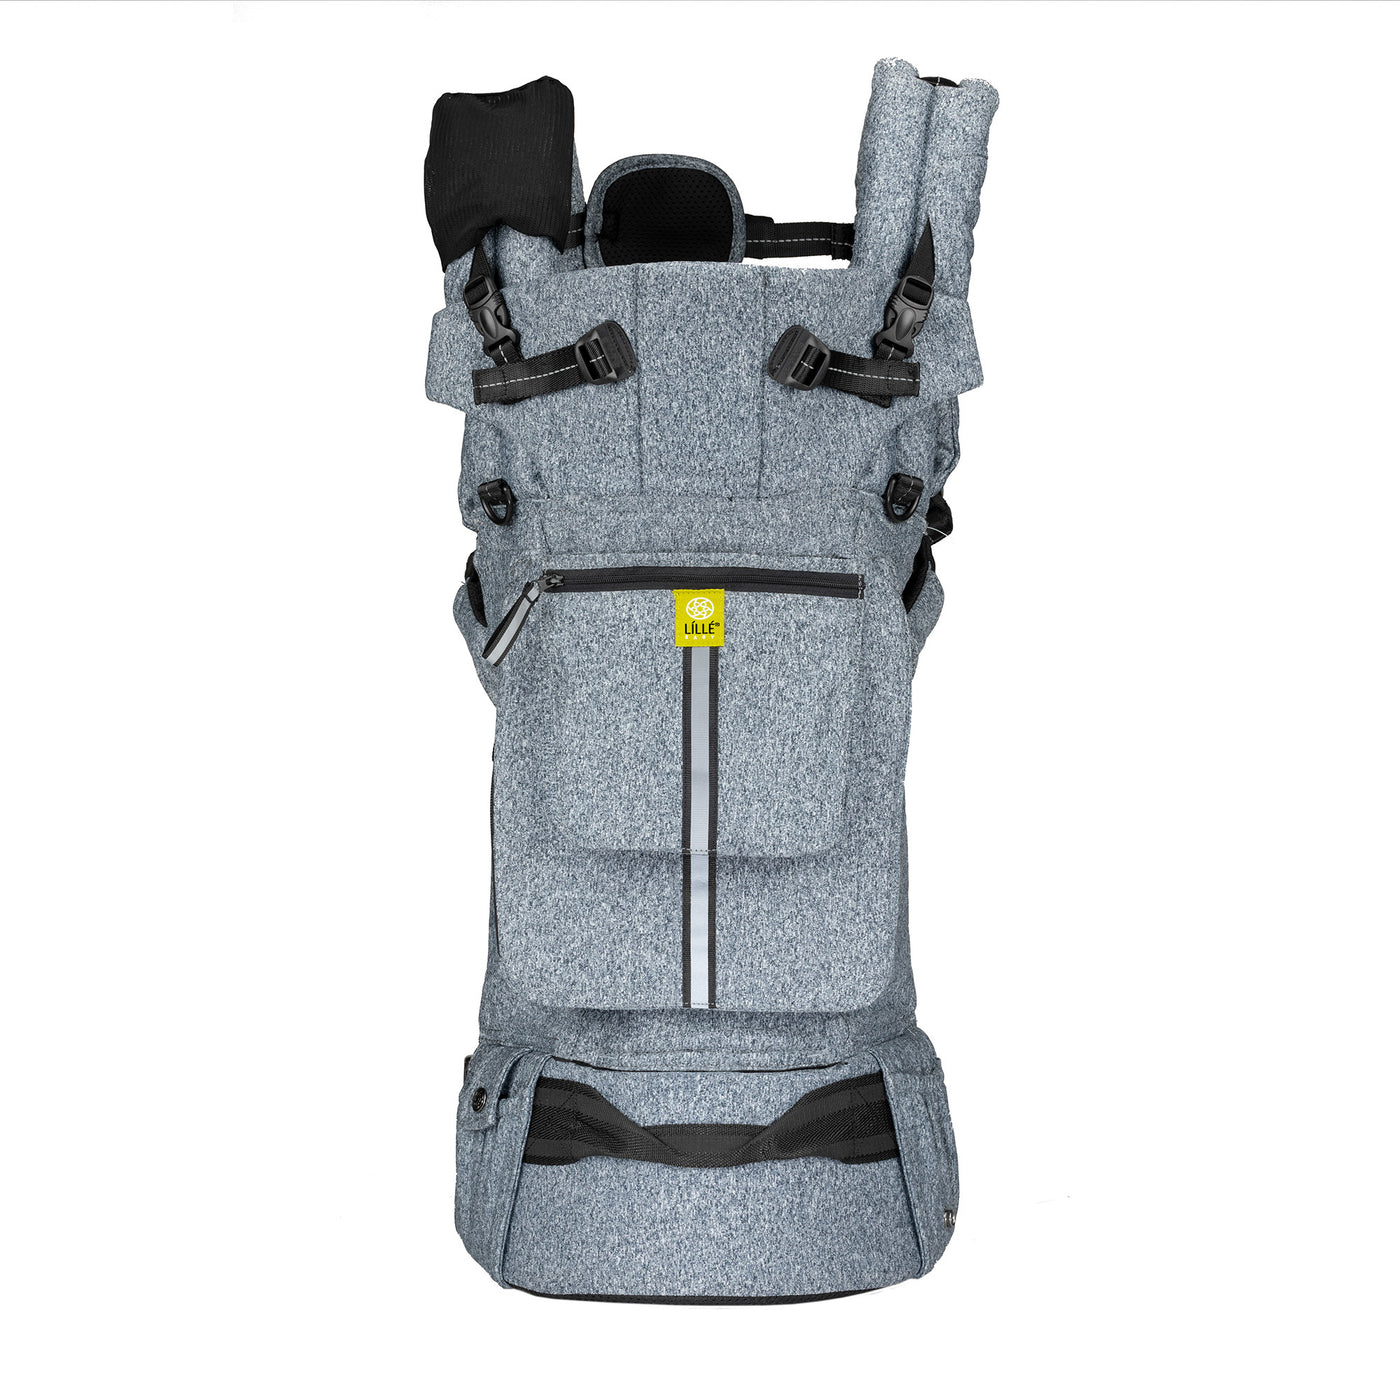 front image of pursuit pro in grey with hood clipped up